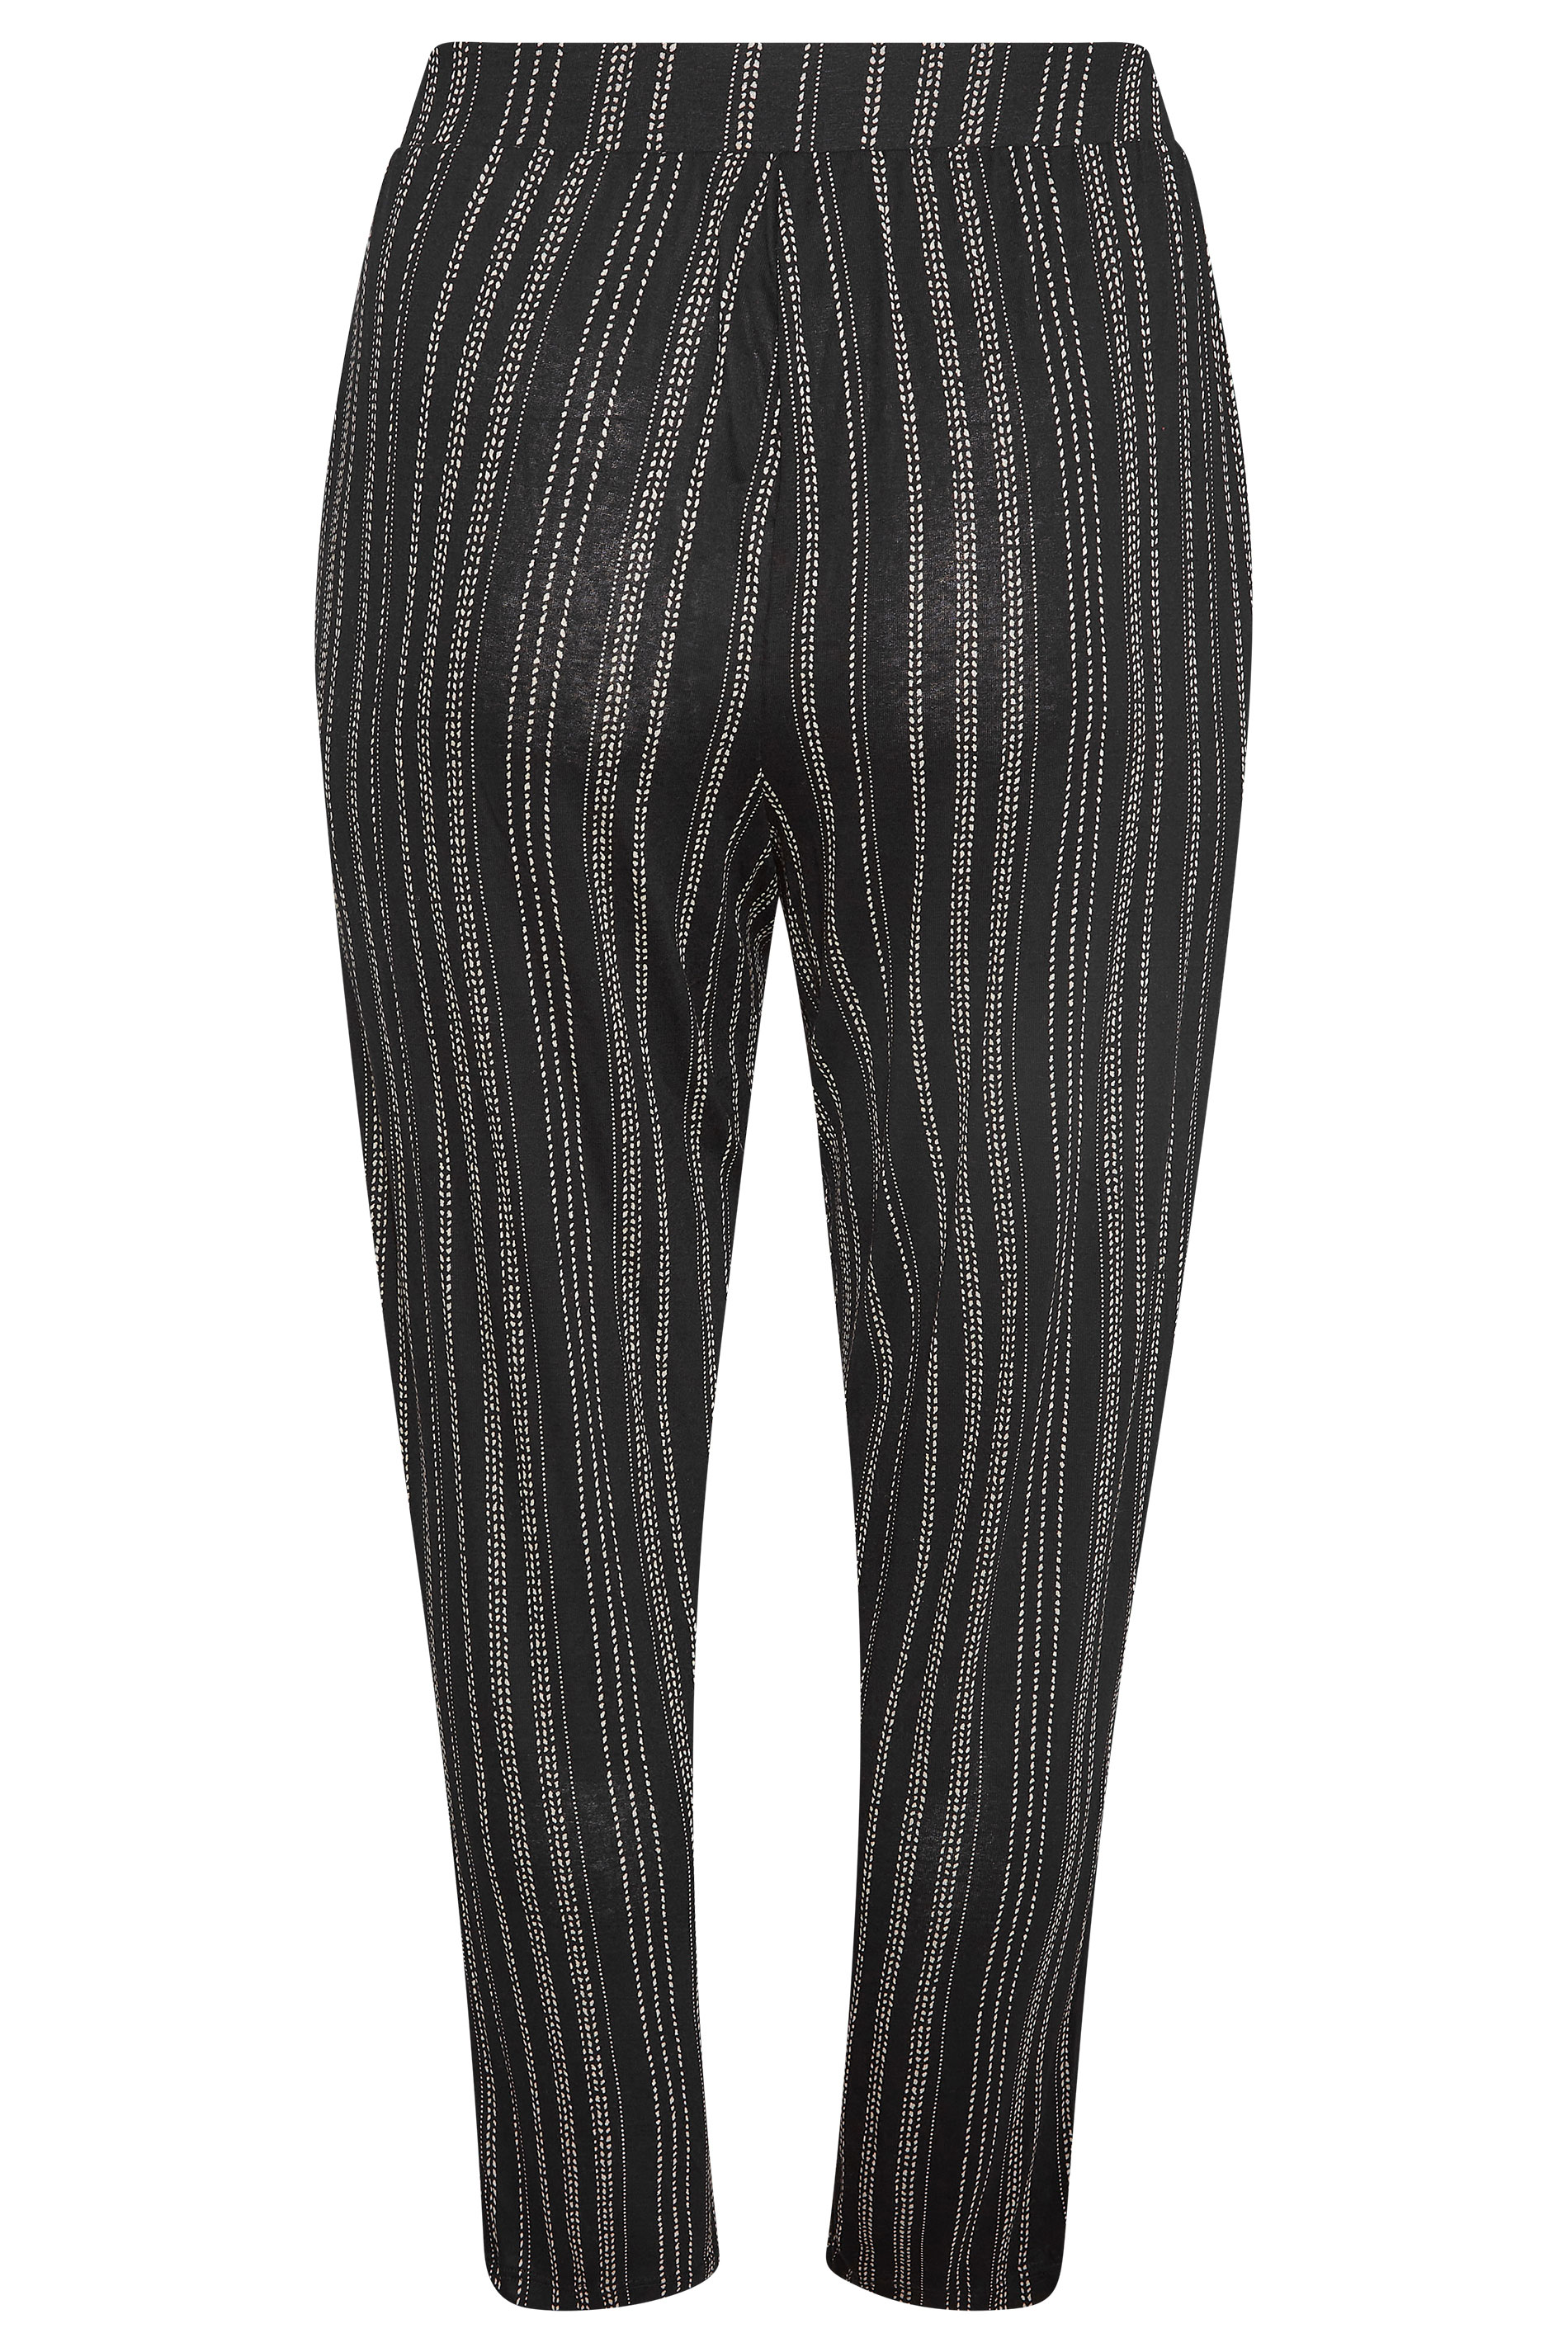 Buy Black and White Striped Pants Online In India  Etsy India